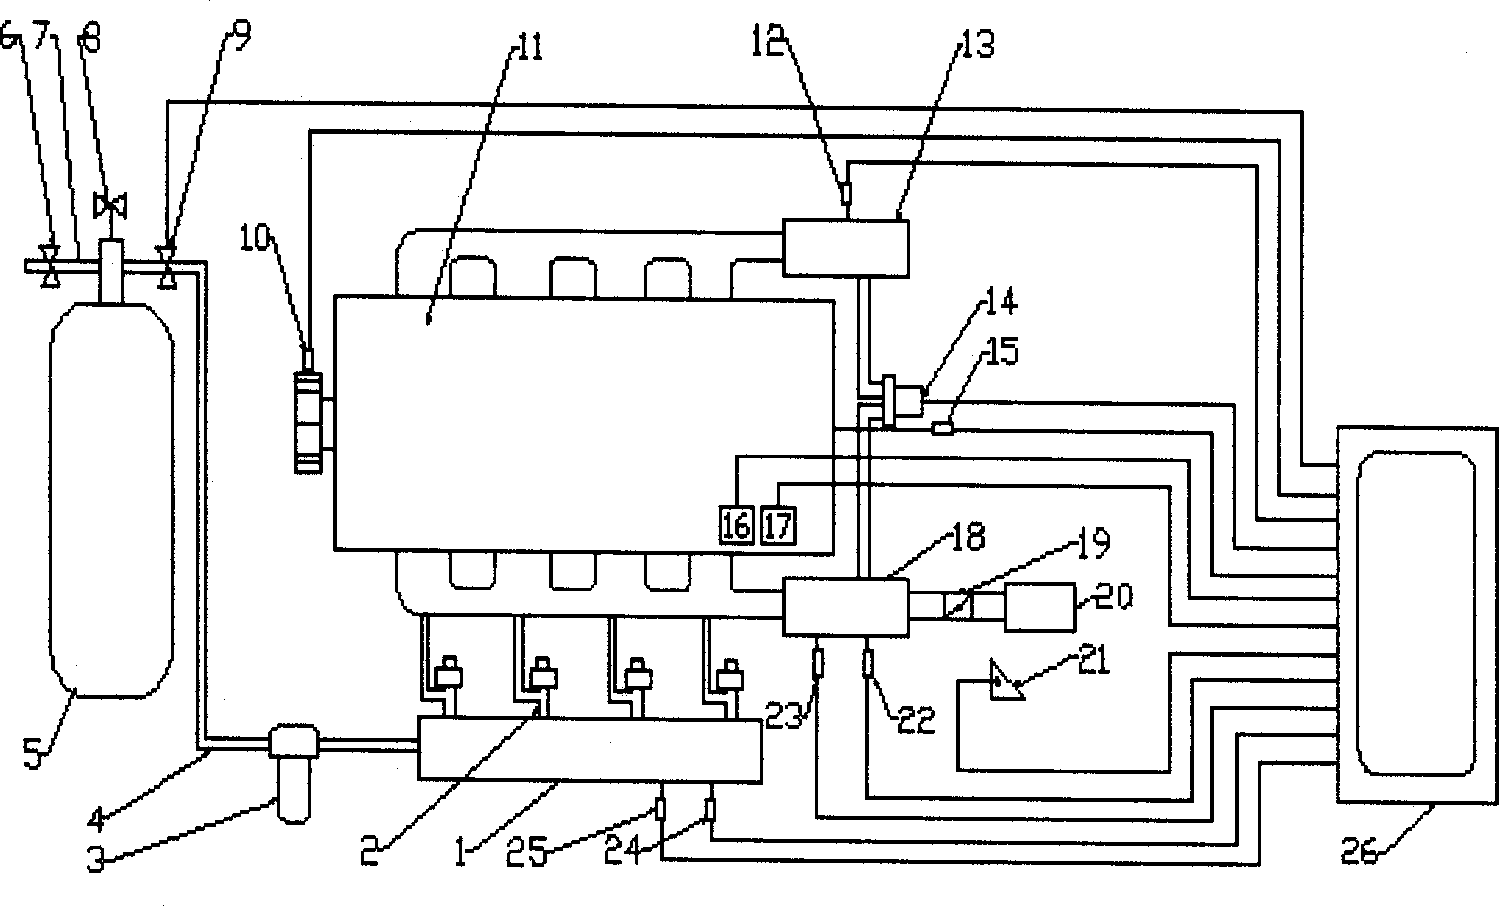 Apparatus and method for controlling internal combustion engine with hydrogen fuel